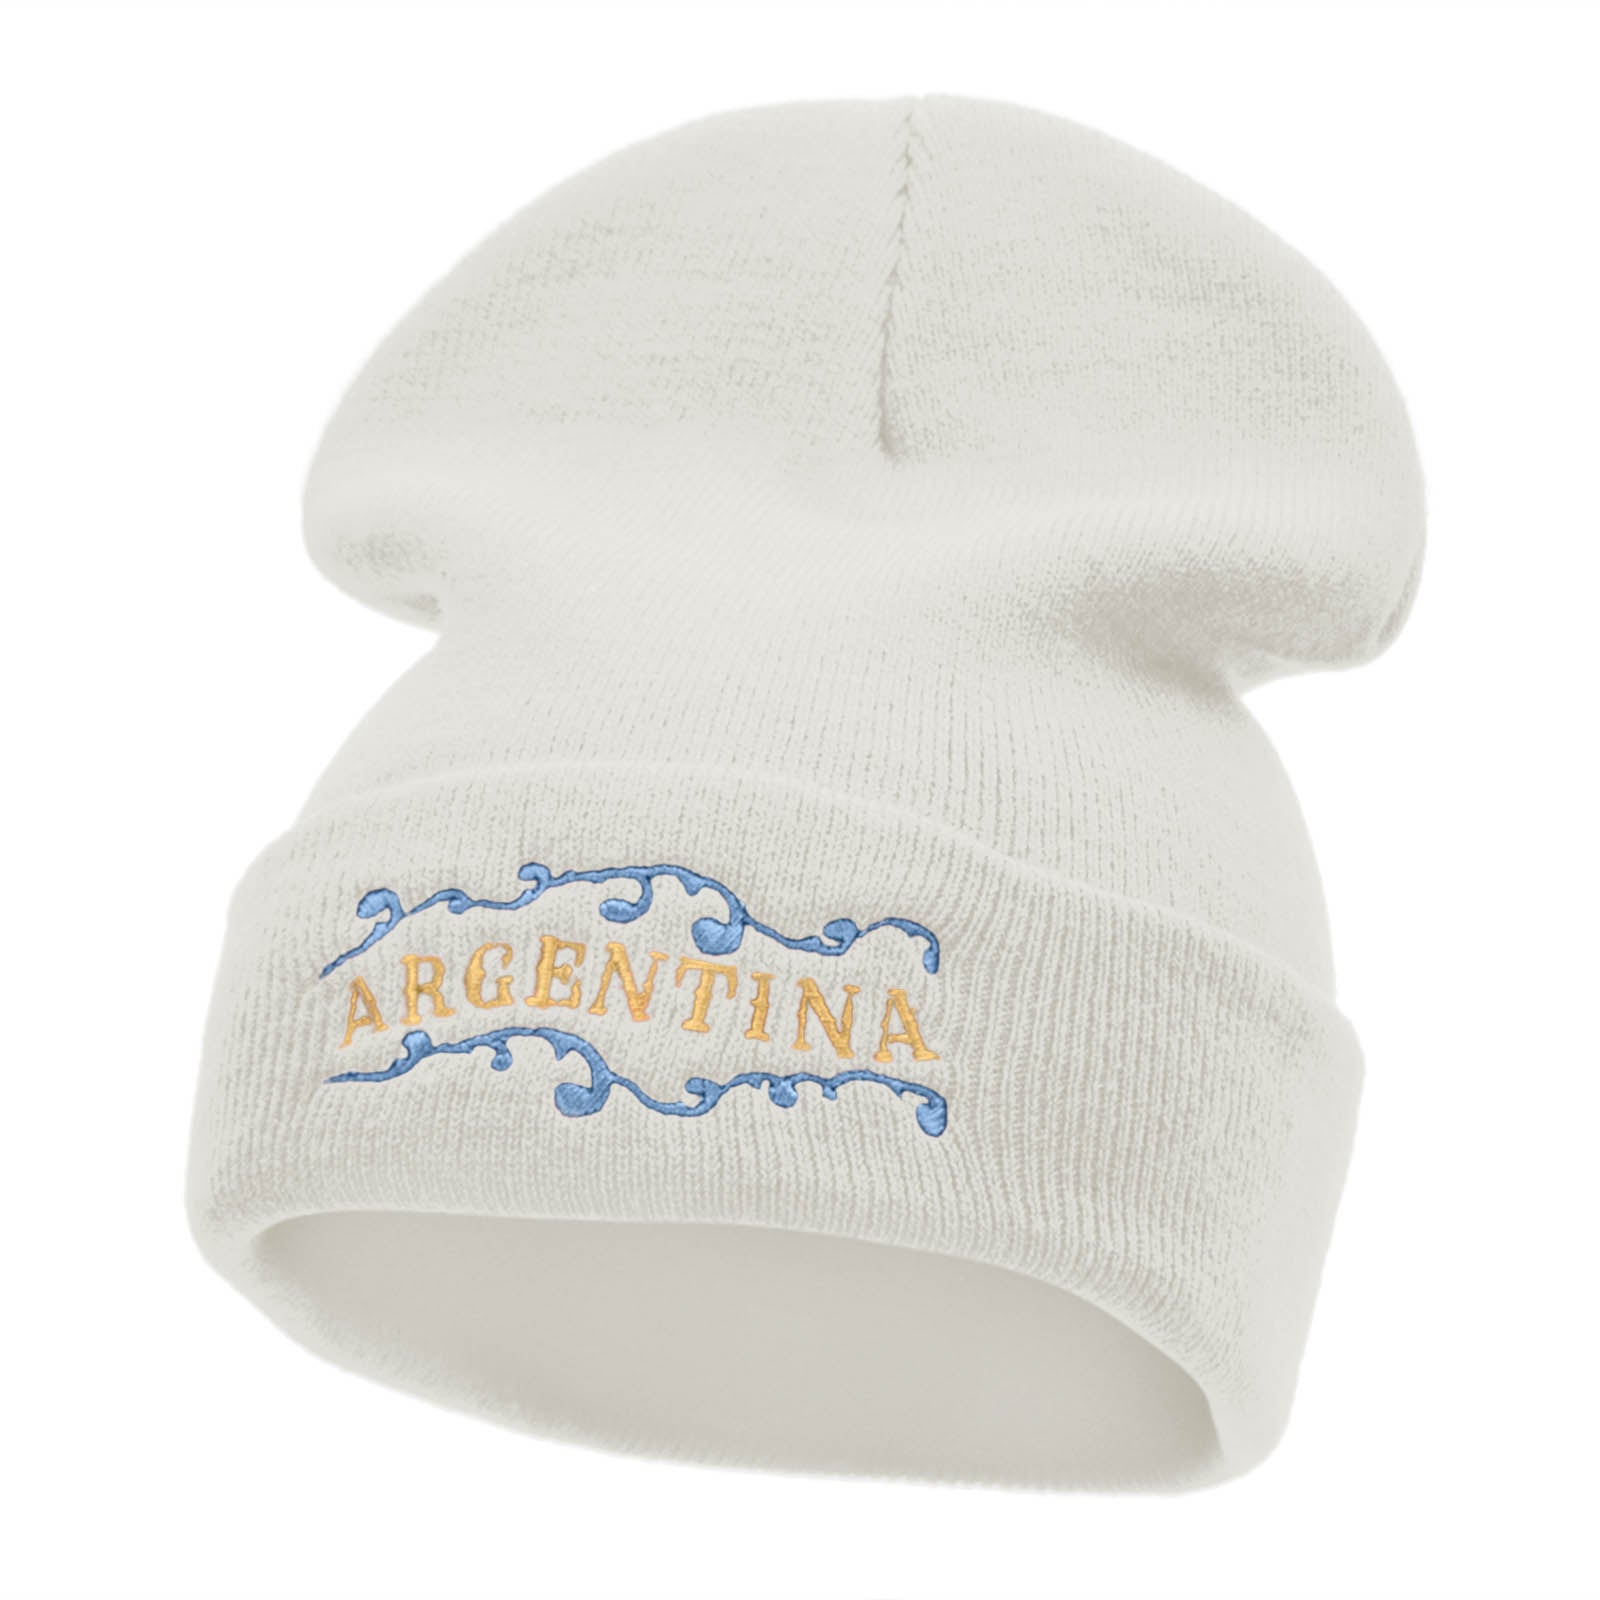 Argentina Embellishment Embroidered 12 Inch Long Knitted Beanie - White OSFM